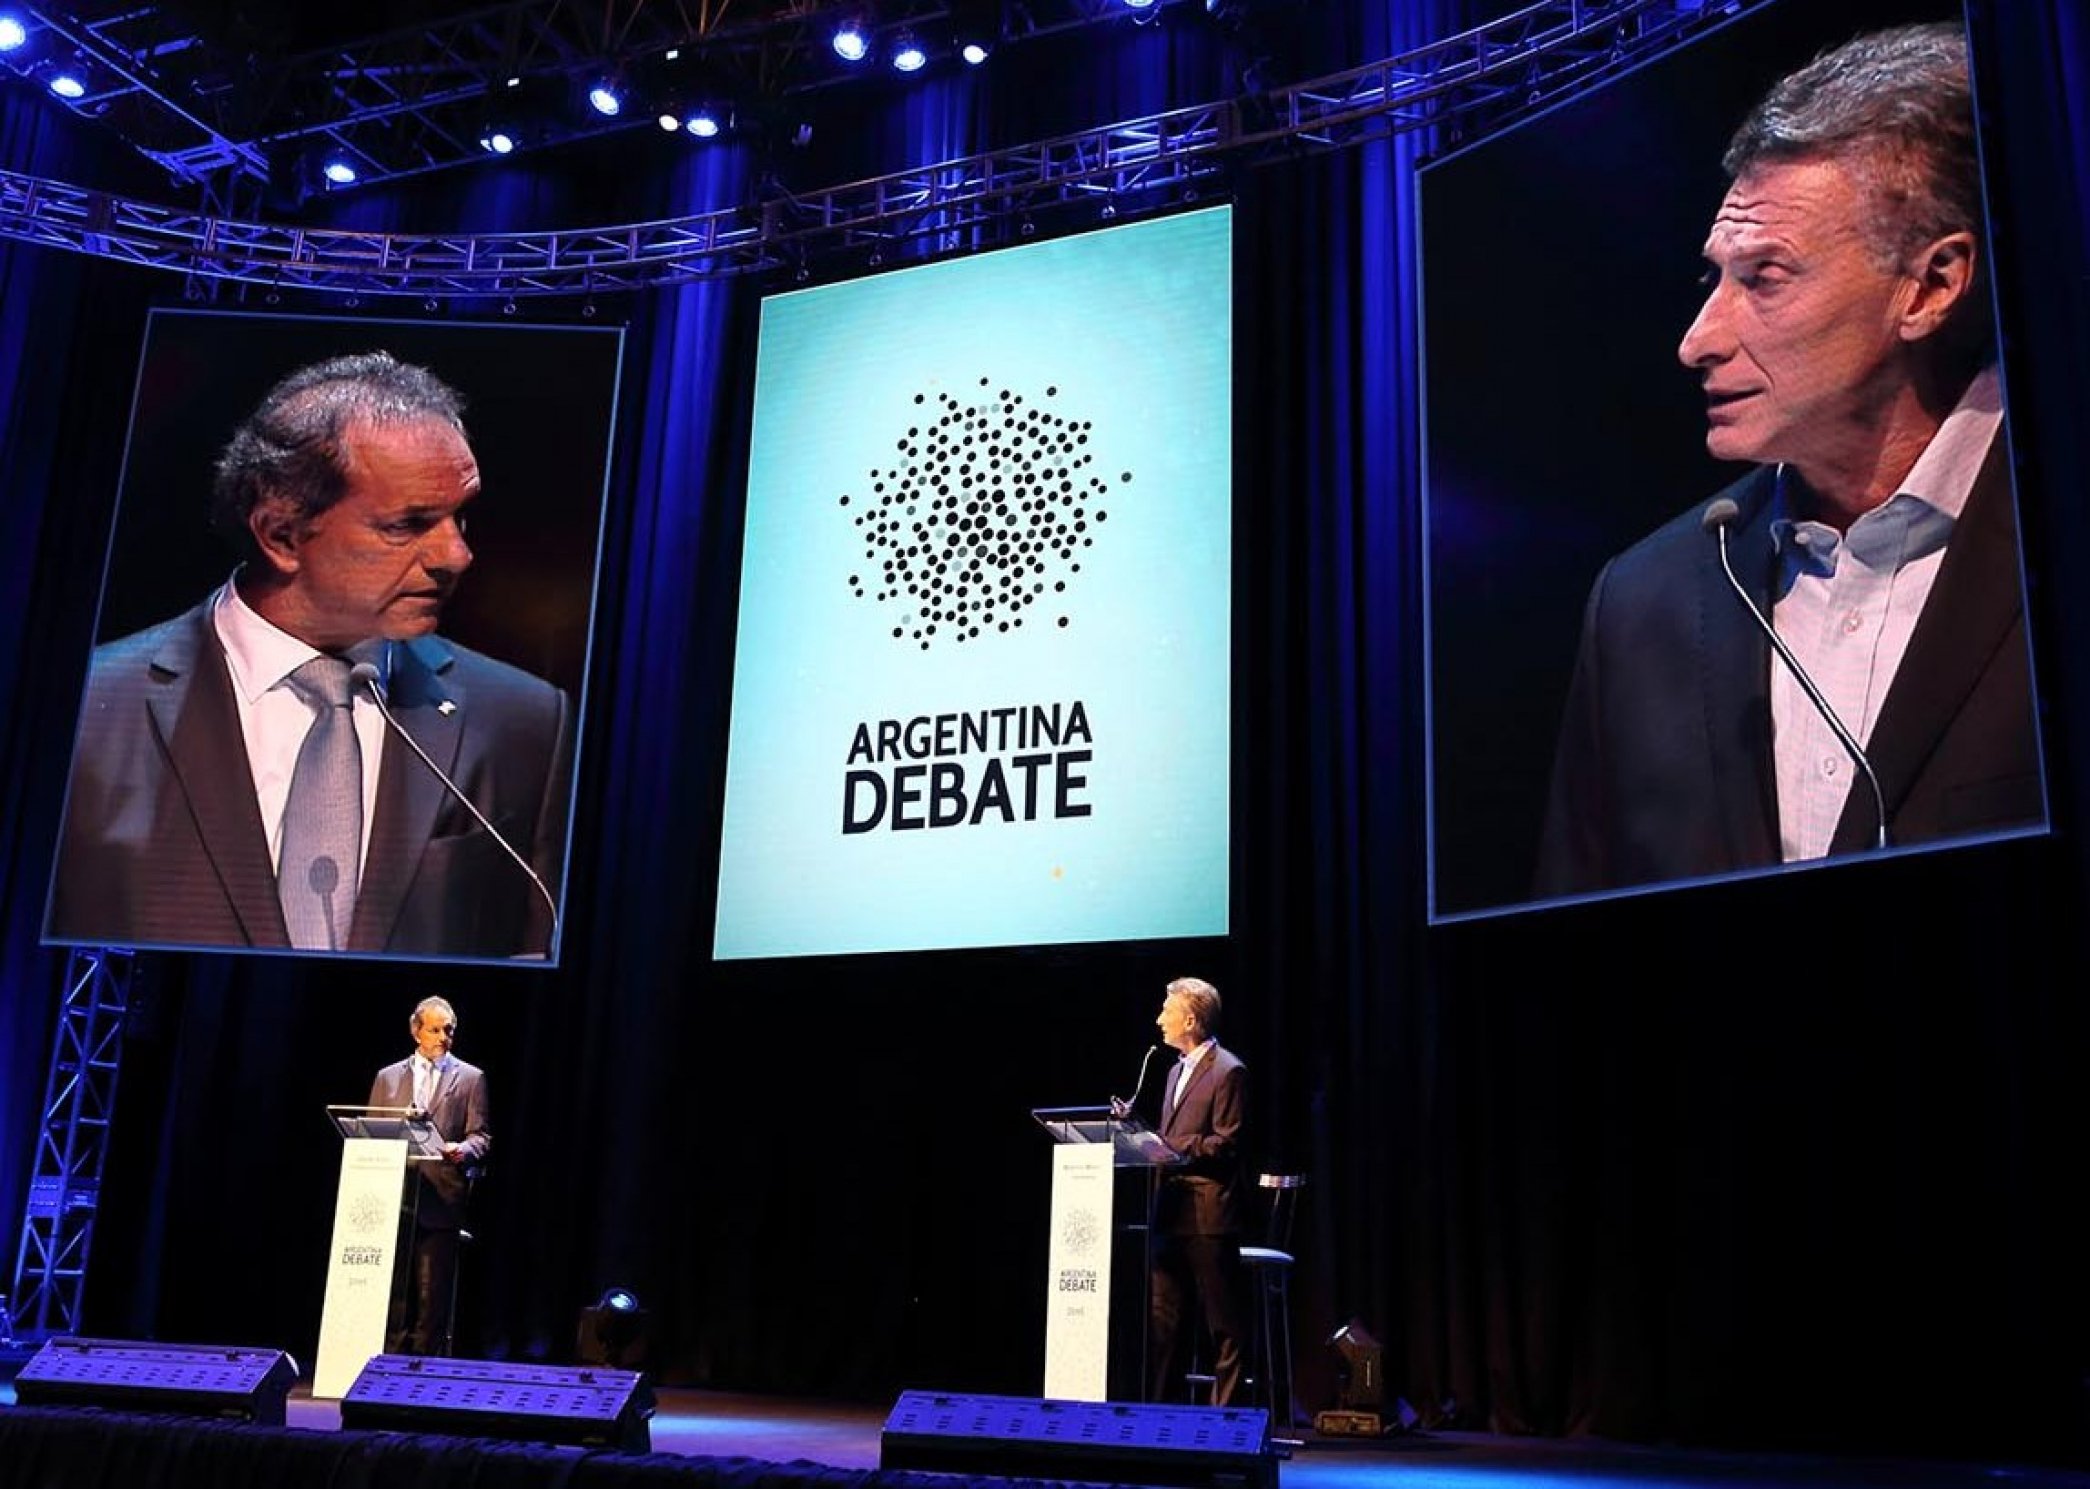 Then presidential candidates, Daniel Scioli and  Mauricio Macri, at the Argentina Debate forum on  November 15, 2015, at the University of Buenos  Aires Law School.